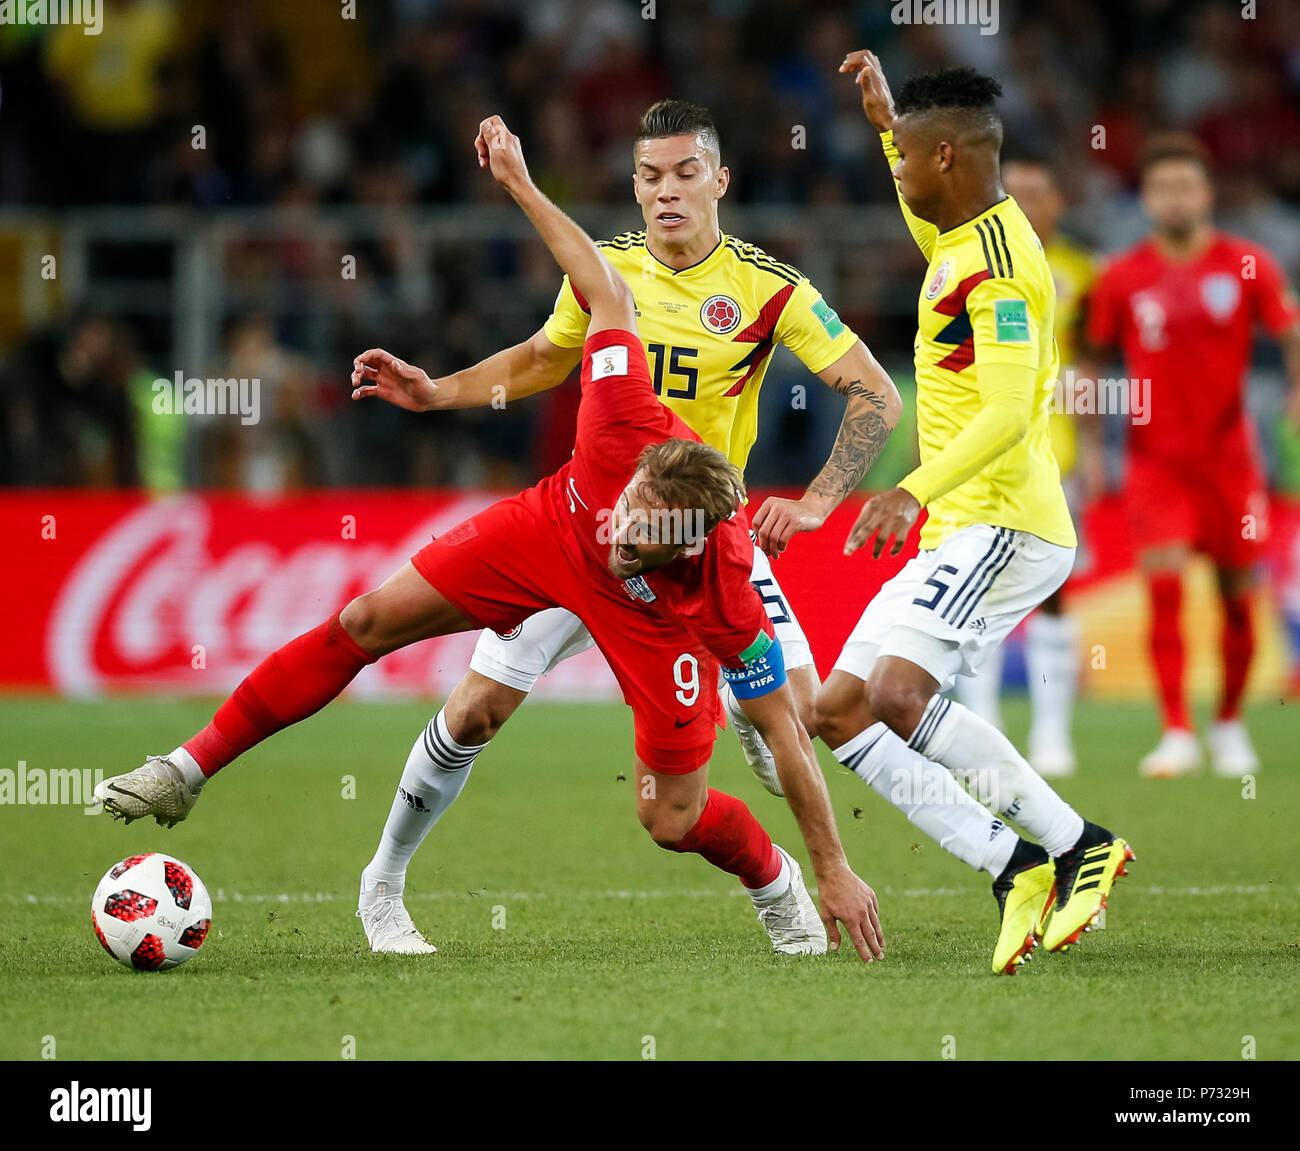 Moscow, Russia. 3rd July, 2018. Harry Kane of England is fouled by Mateus Uribe of Colombia and Wilmar Barrios of Colombia during the 2018 FIFA World Cup Round of 16 match between Colombia and England at Spartak Stadium on July 3rd 2018 in Moscow, Russia.Credit: PHC Images/Alamy Live News Stock Photo